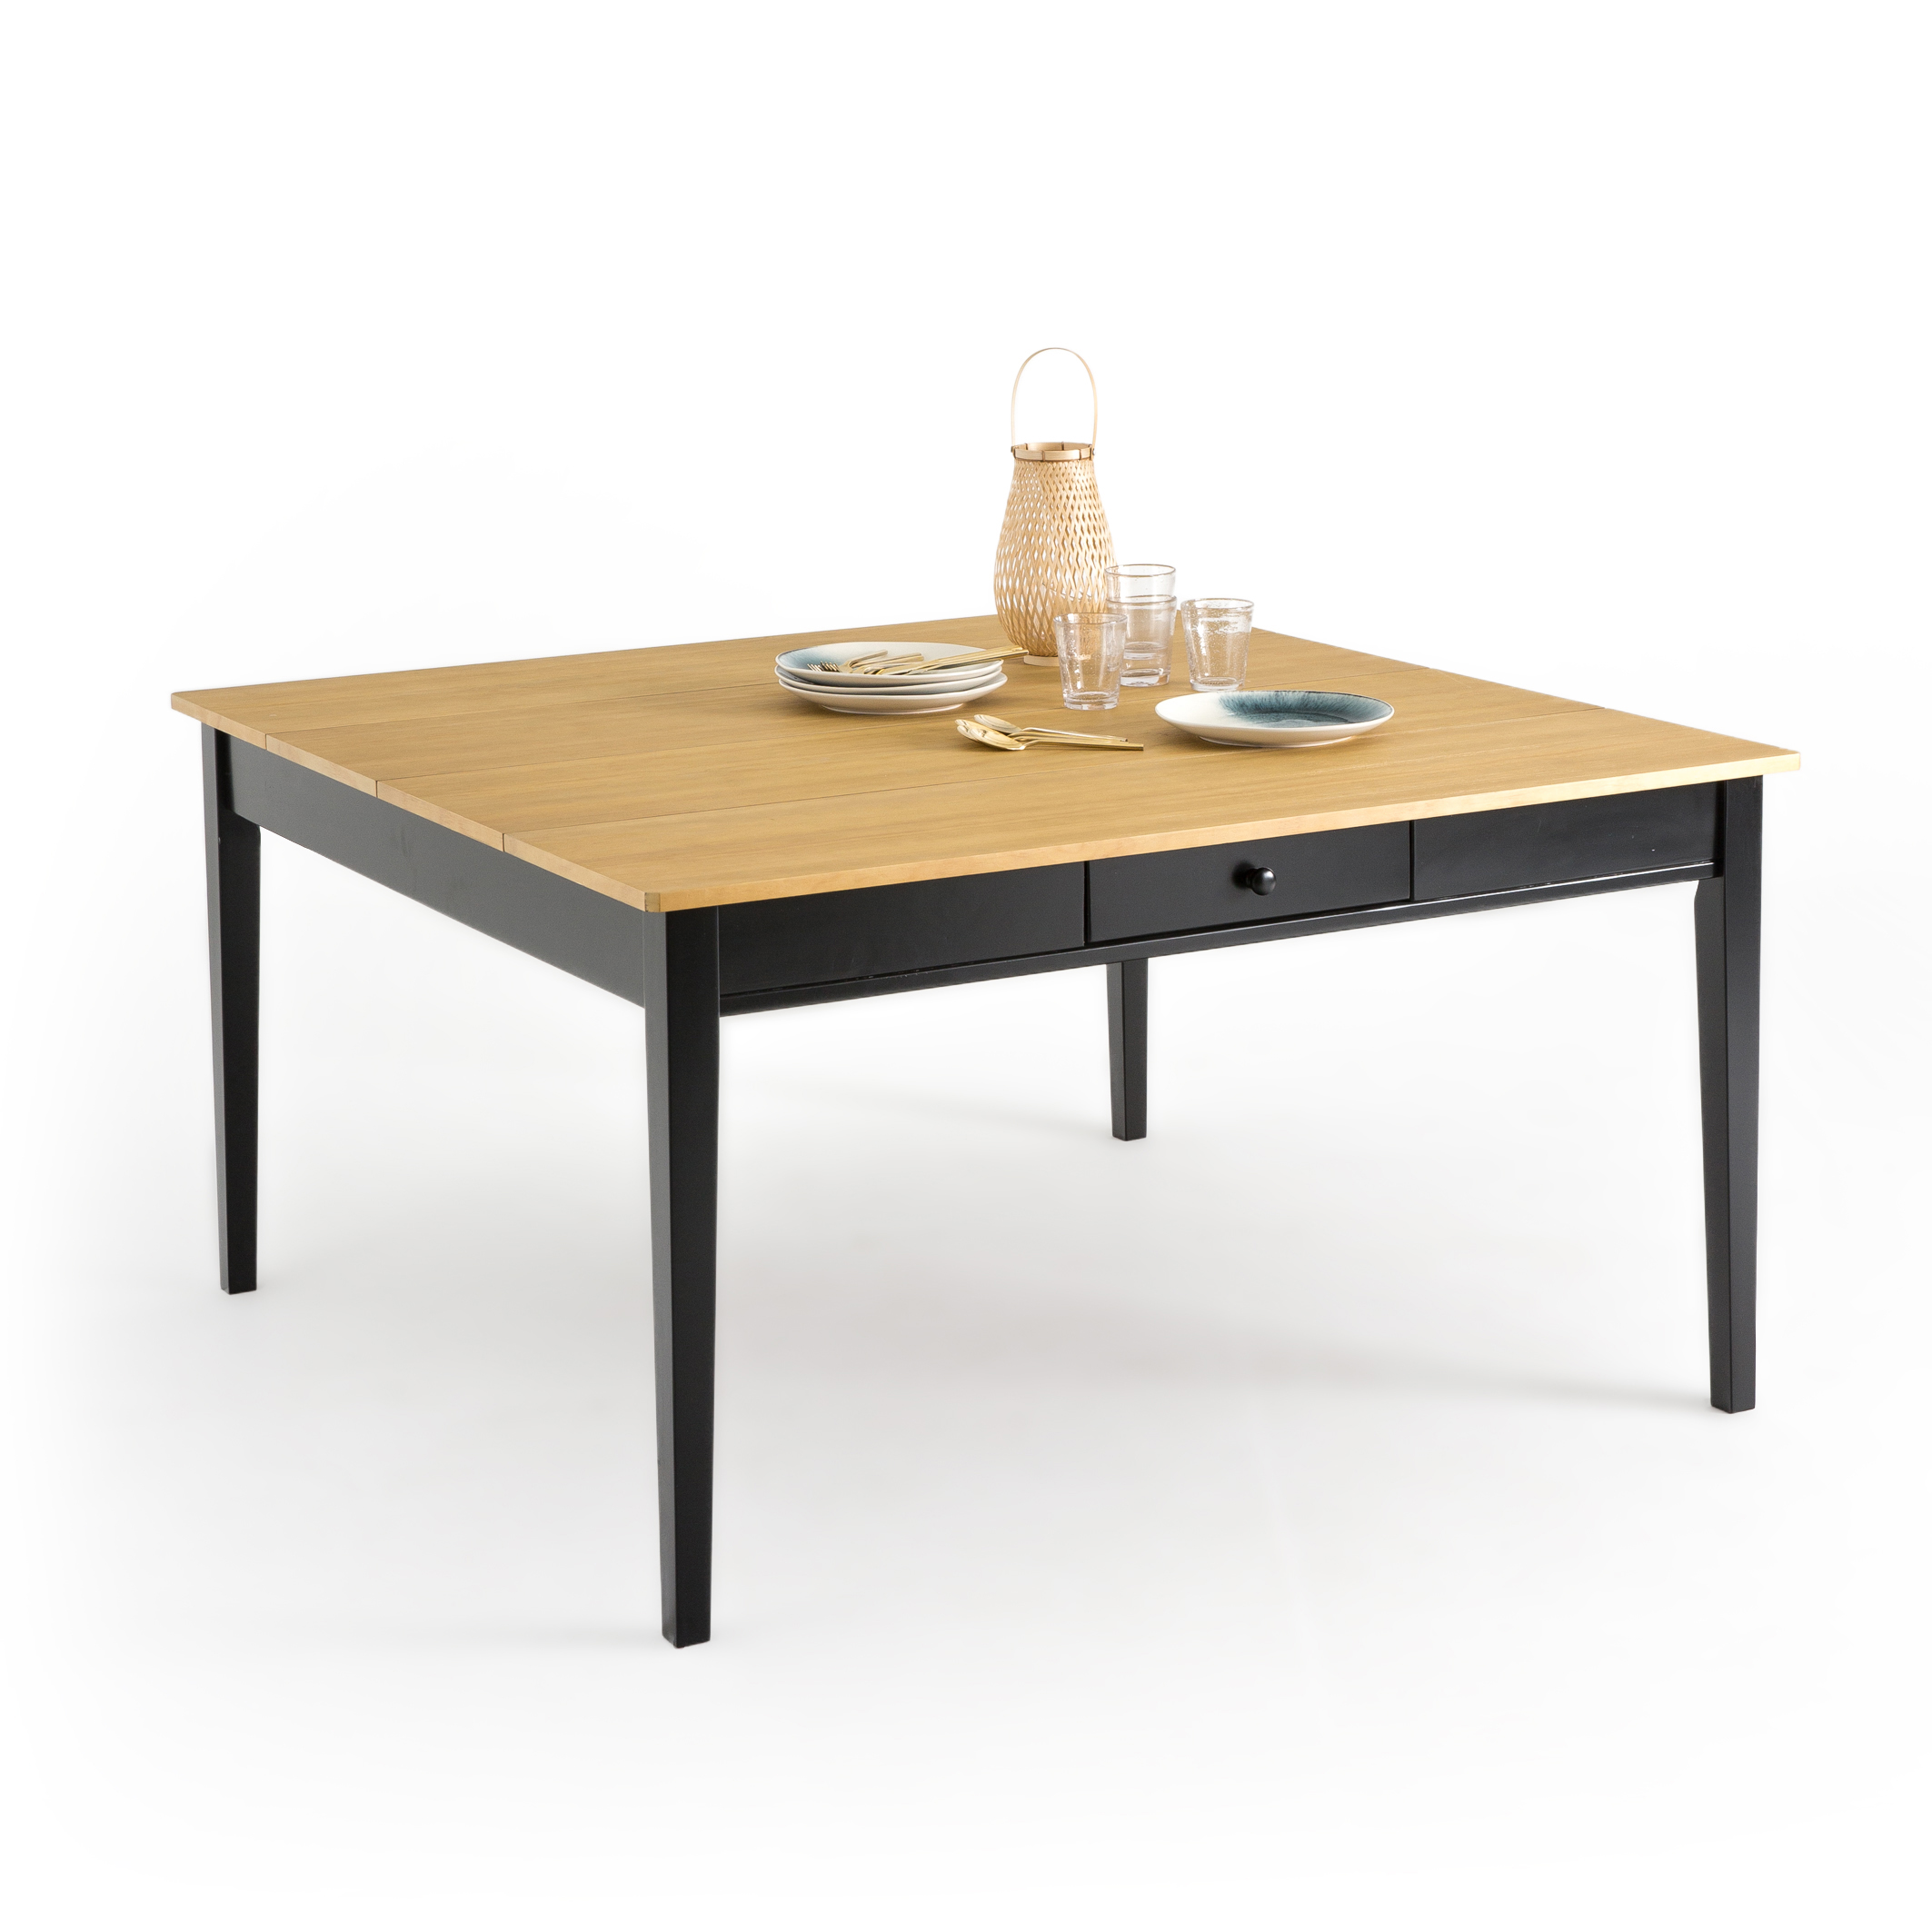 Alvina Dining Table Seats 8 Black La, What Size Is A Table That Seats 8